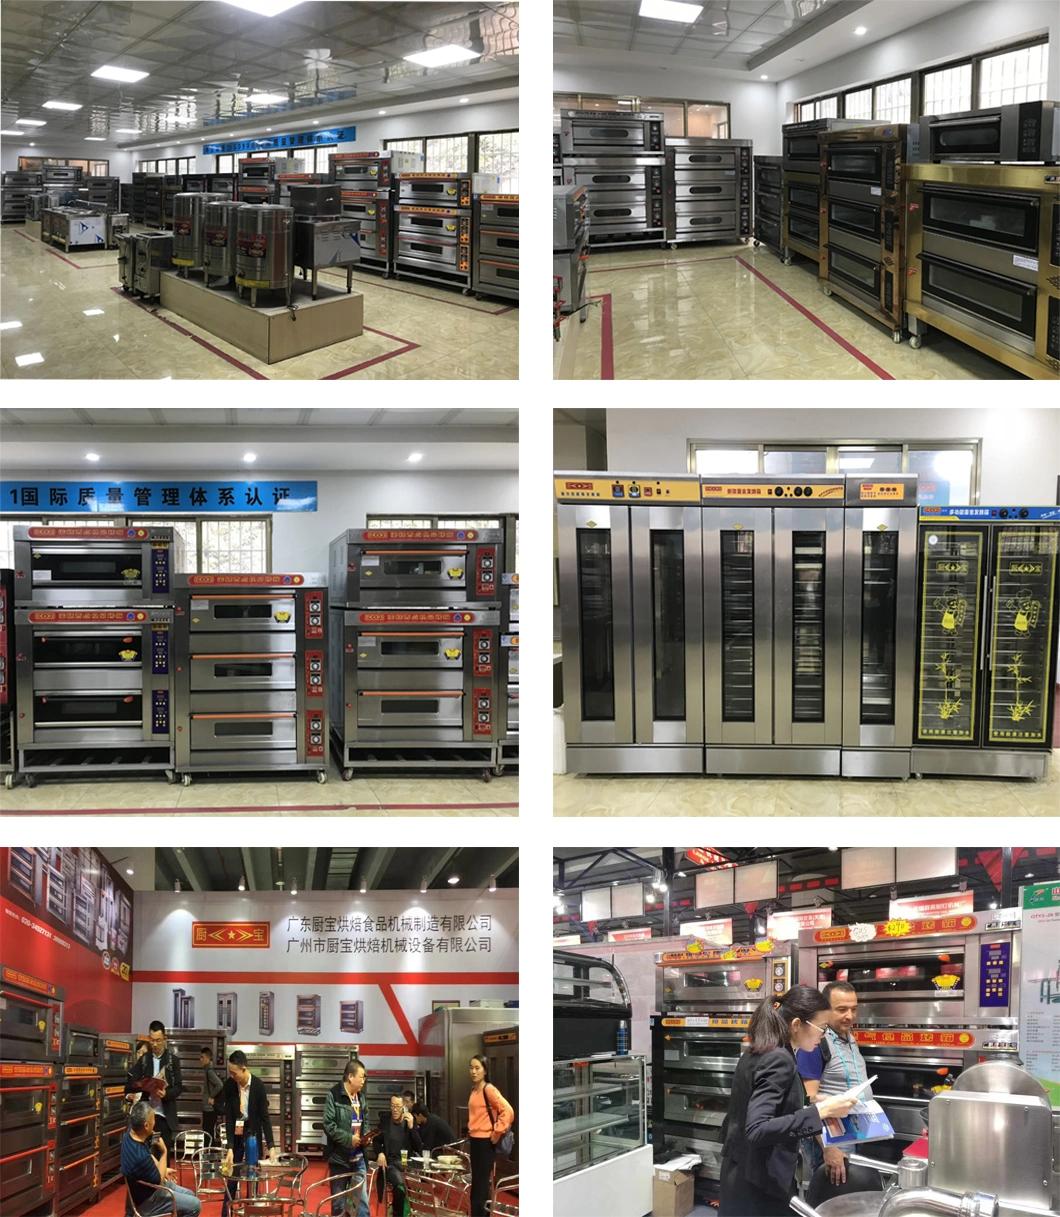 3 Deck 6 Trays Electric Oven for Commercial Restaurant Kitchen Baking Equipment Bakery Machinery Food Machine with Computer Controller Bread Oven